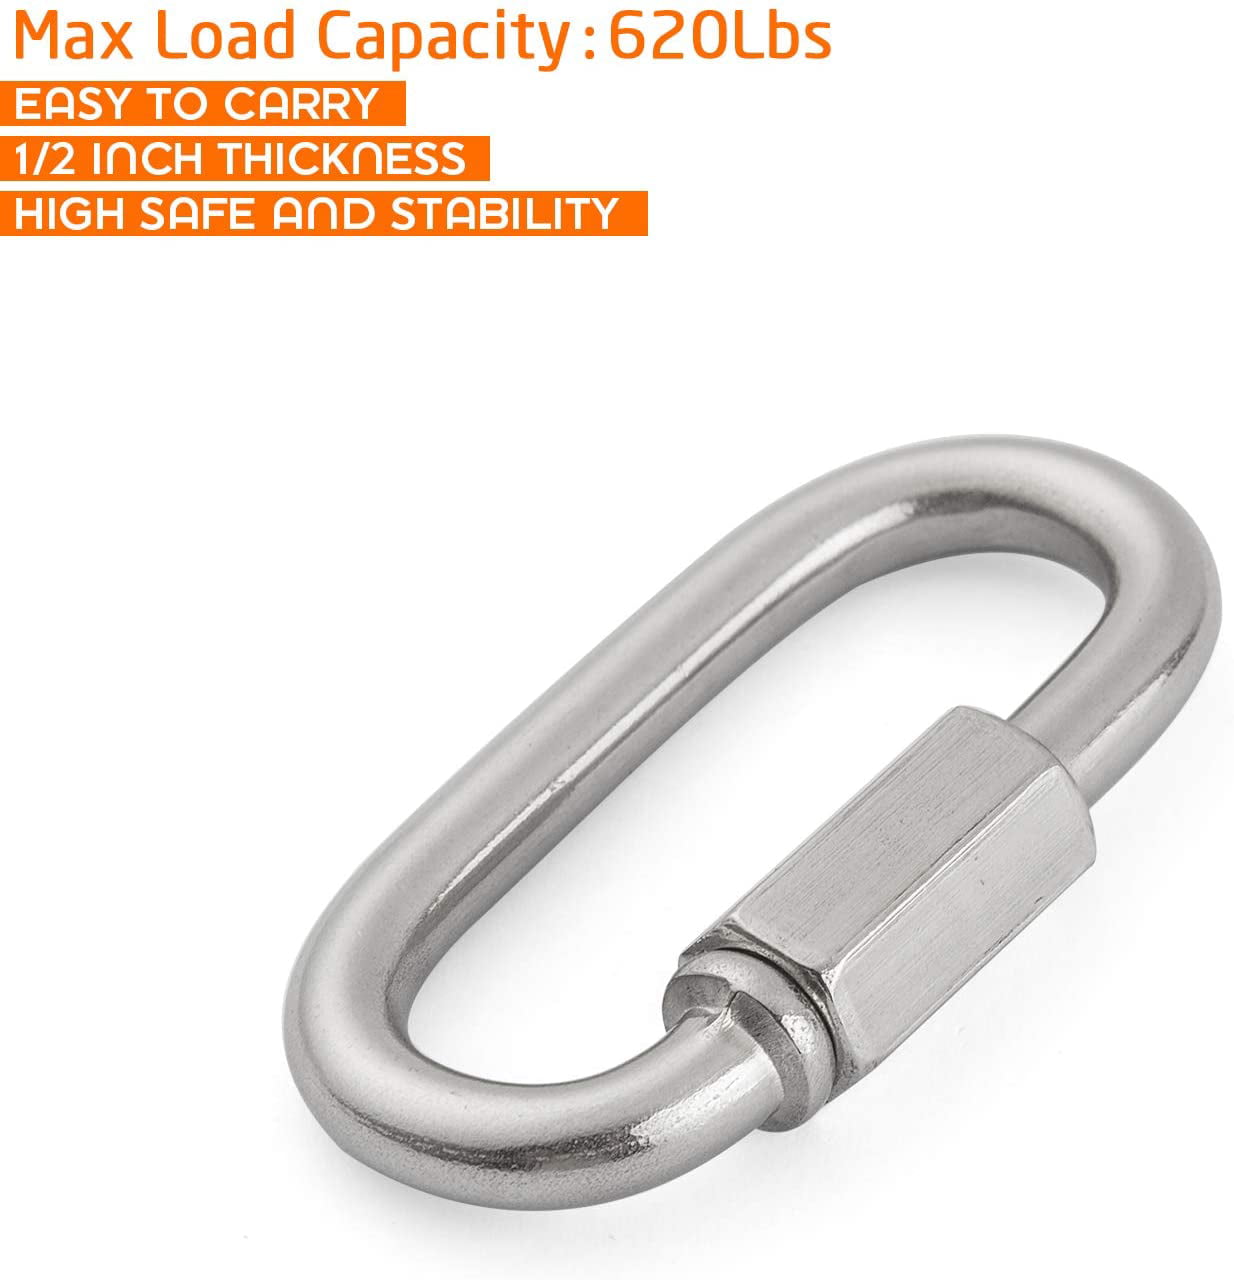 Stainless Steel Quick Links Oval Carabiner Rope Cable Shackle Connector 